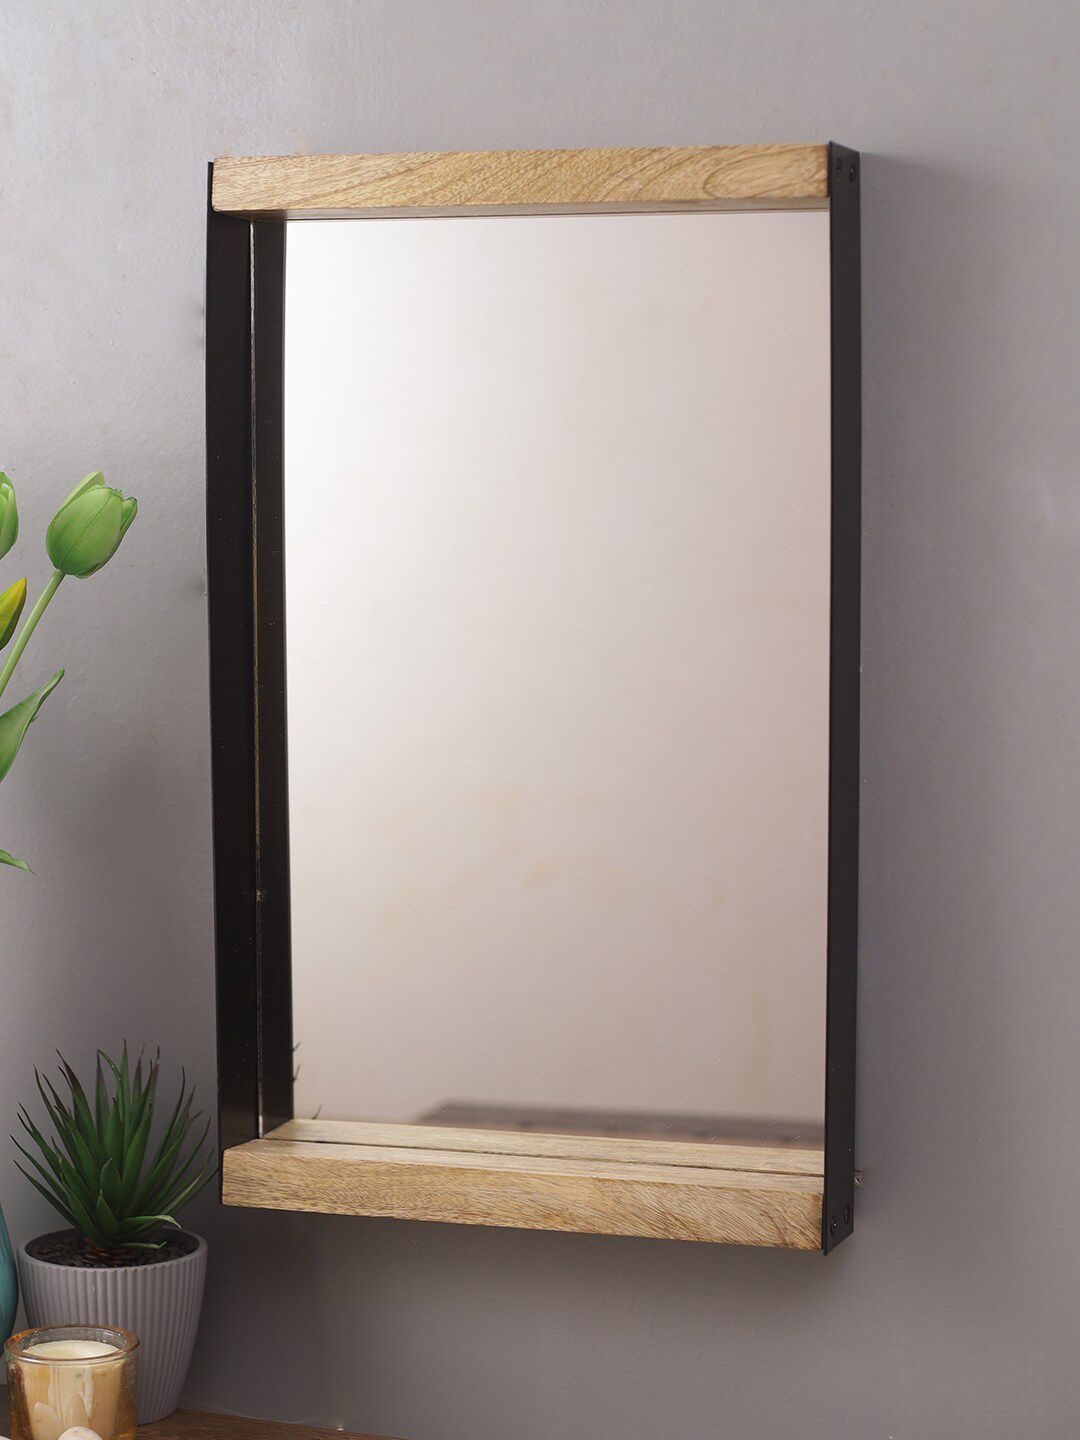 Aapno Rajasthan Beige Handcrafted Rectangular Wooden Wall Mirror Price in India